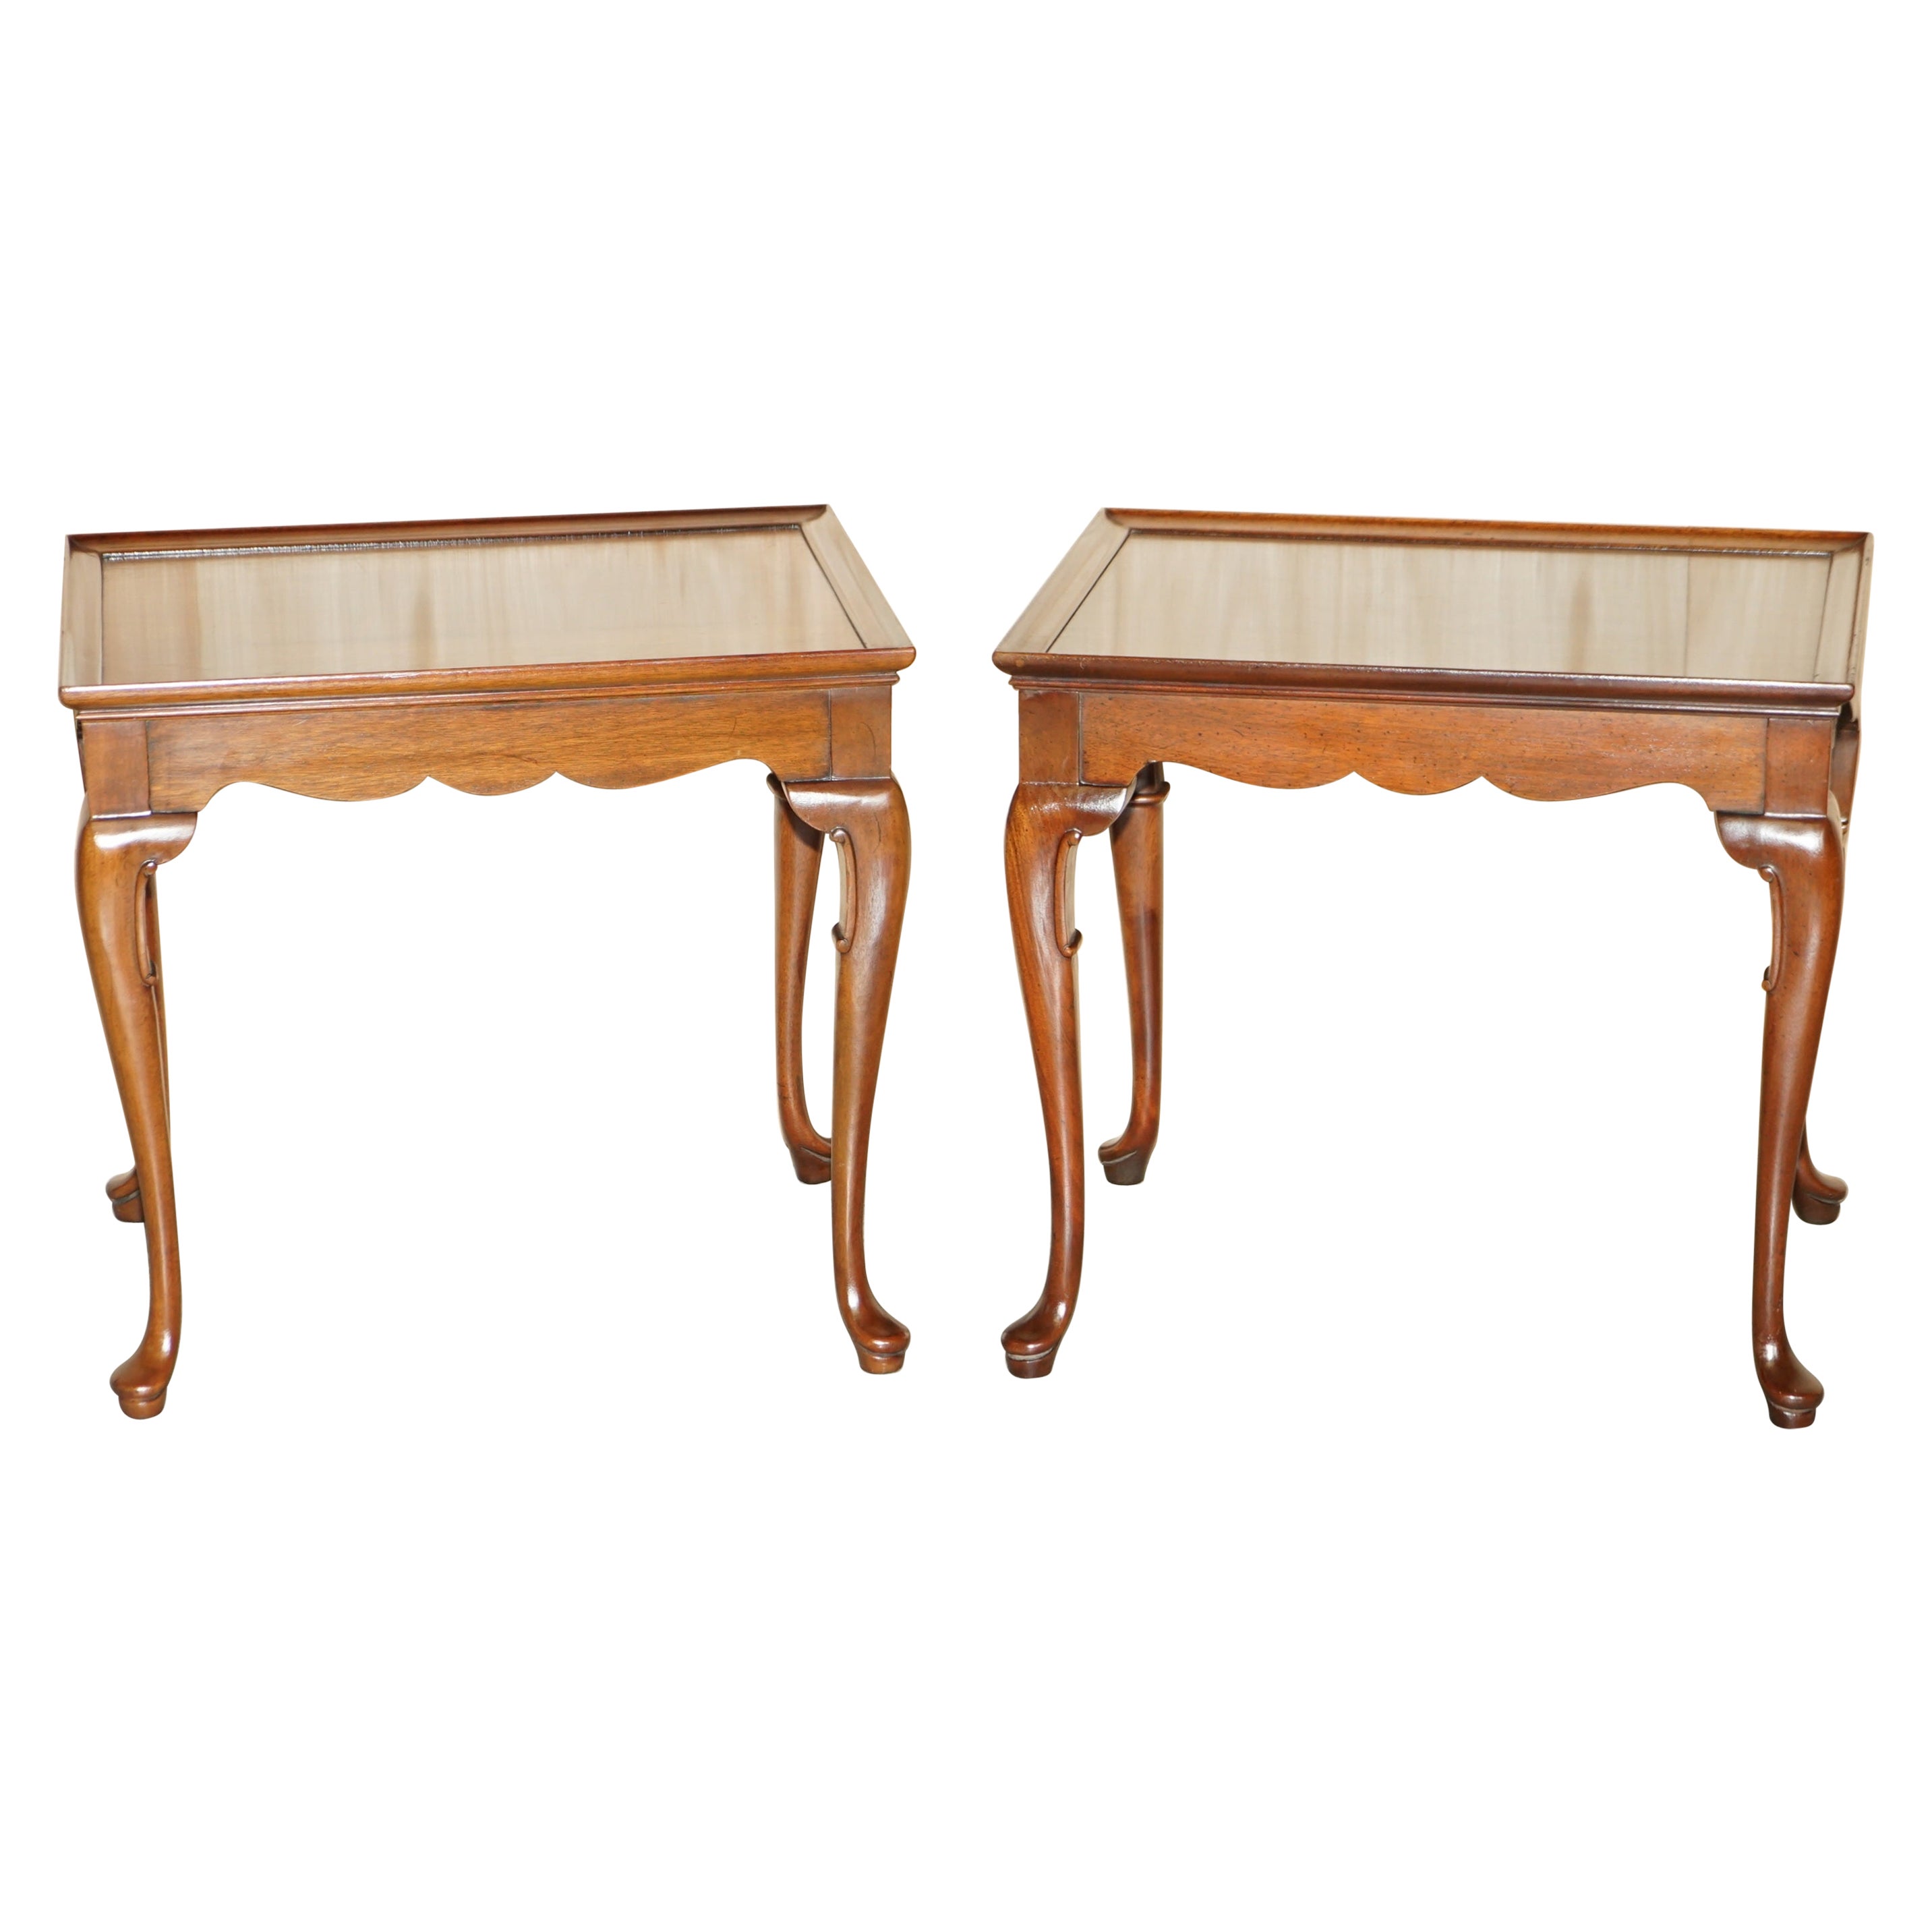 We are delighted to offer for sale this lovely pair of Georgian Irish style Antique Victorian mahogany side end tables

A good looking well made and decorative pair, the elegant cabriolet legs are hand carved with Georgian Irish details to the